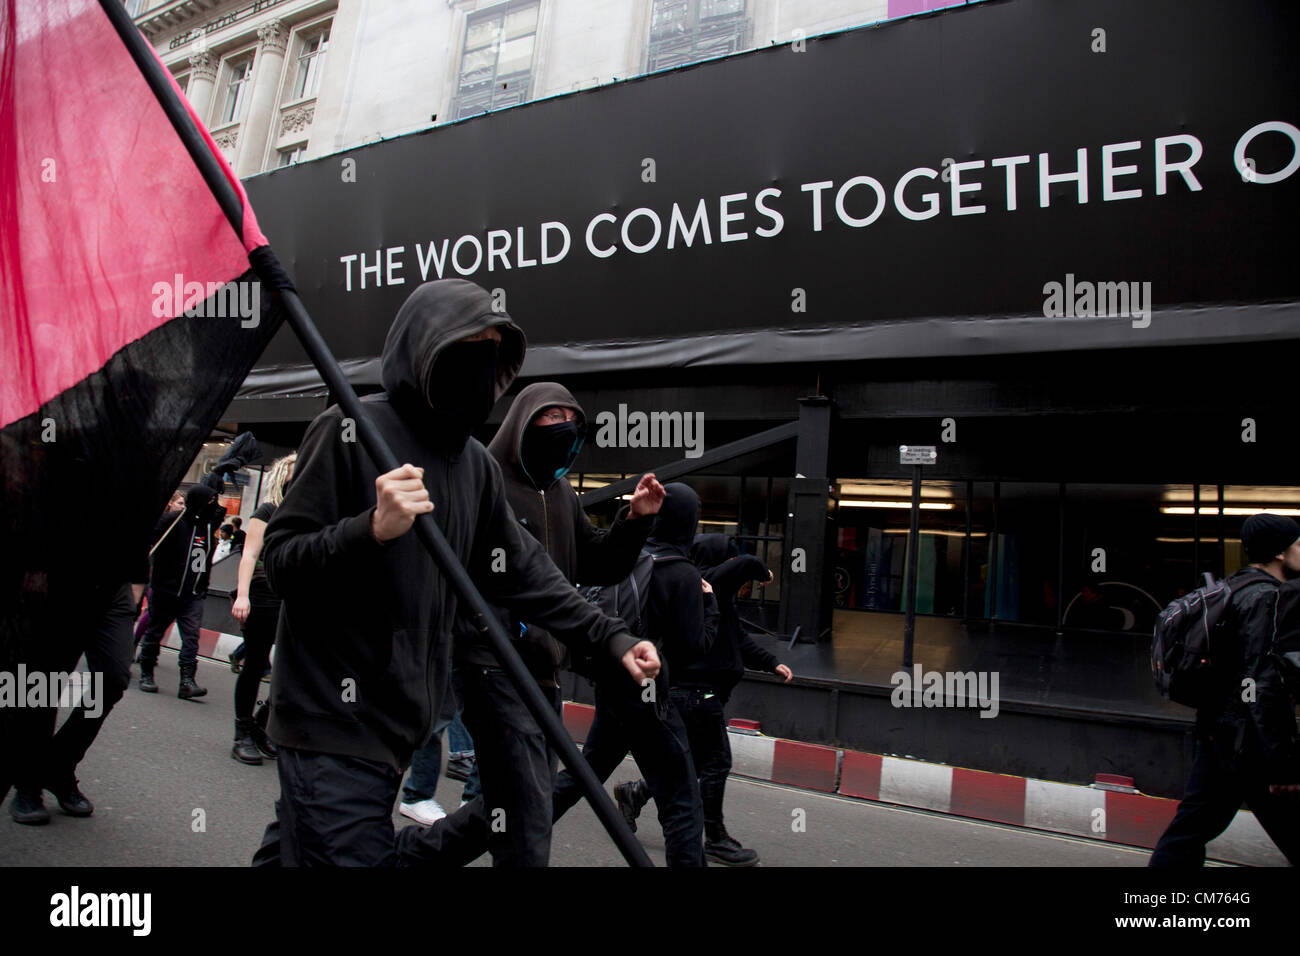 London, UK. Saturday 20th October 2012. Members of the Balck Bloc anarchists group confuse cause confusion in central London during the TUC (Trades Union Congress) march 'A Future That Works'. Demonstration against austerity cuts by the government. Credit:  Michael Kemp / Alamy Live News Stock Photo